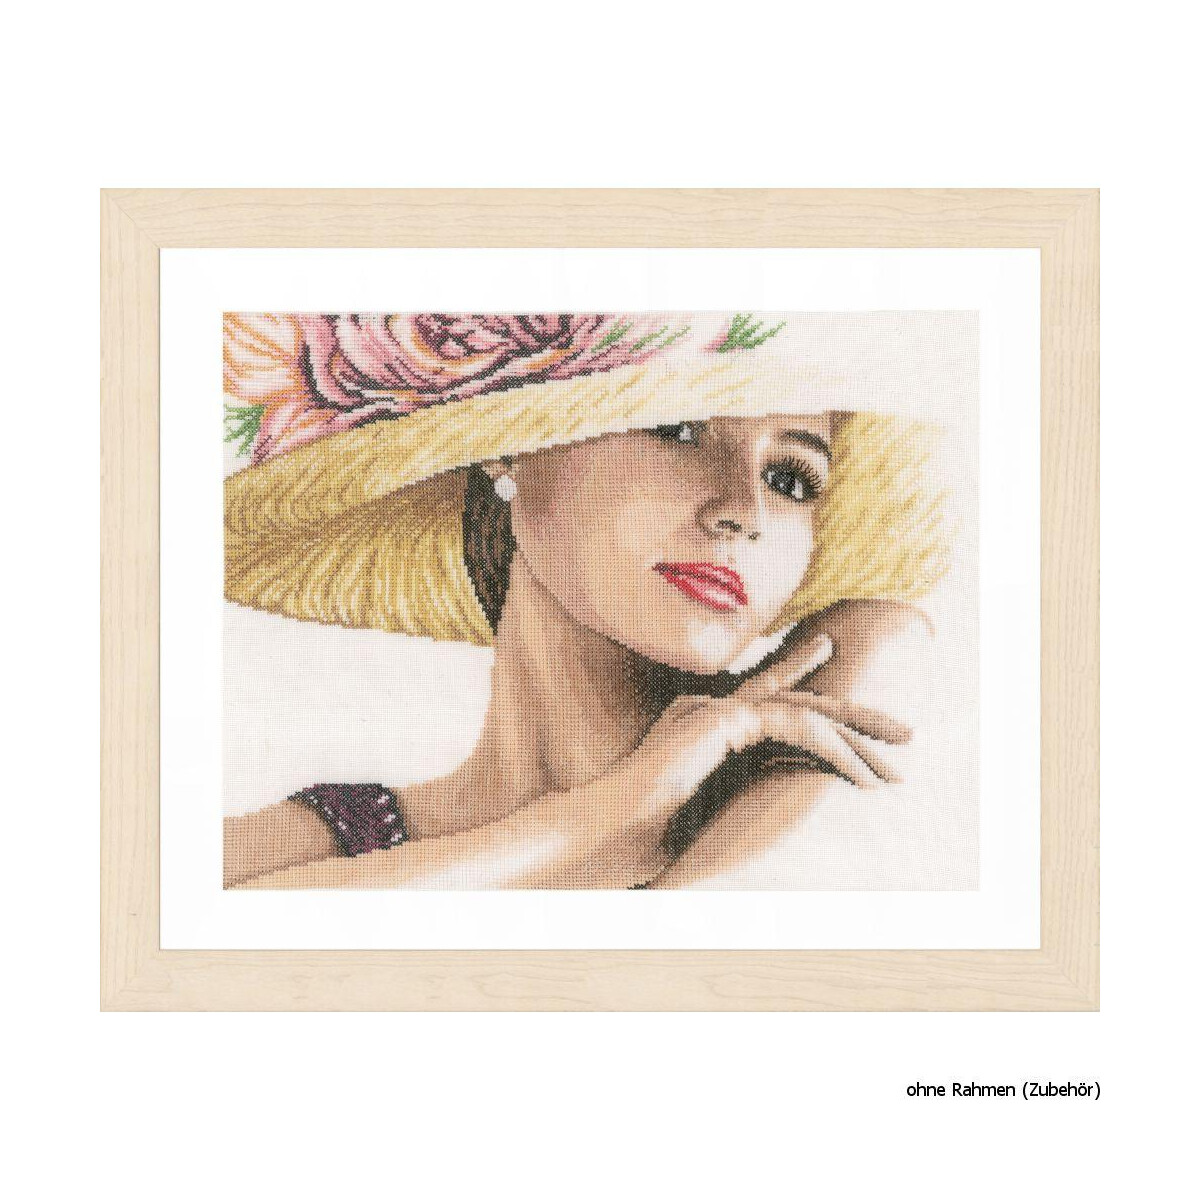 A framed Lanarte embroidery pack artwork of a woman...